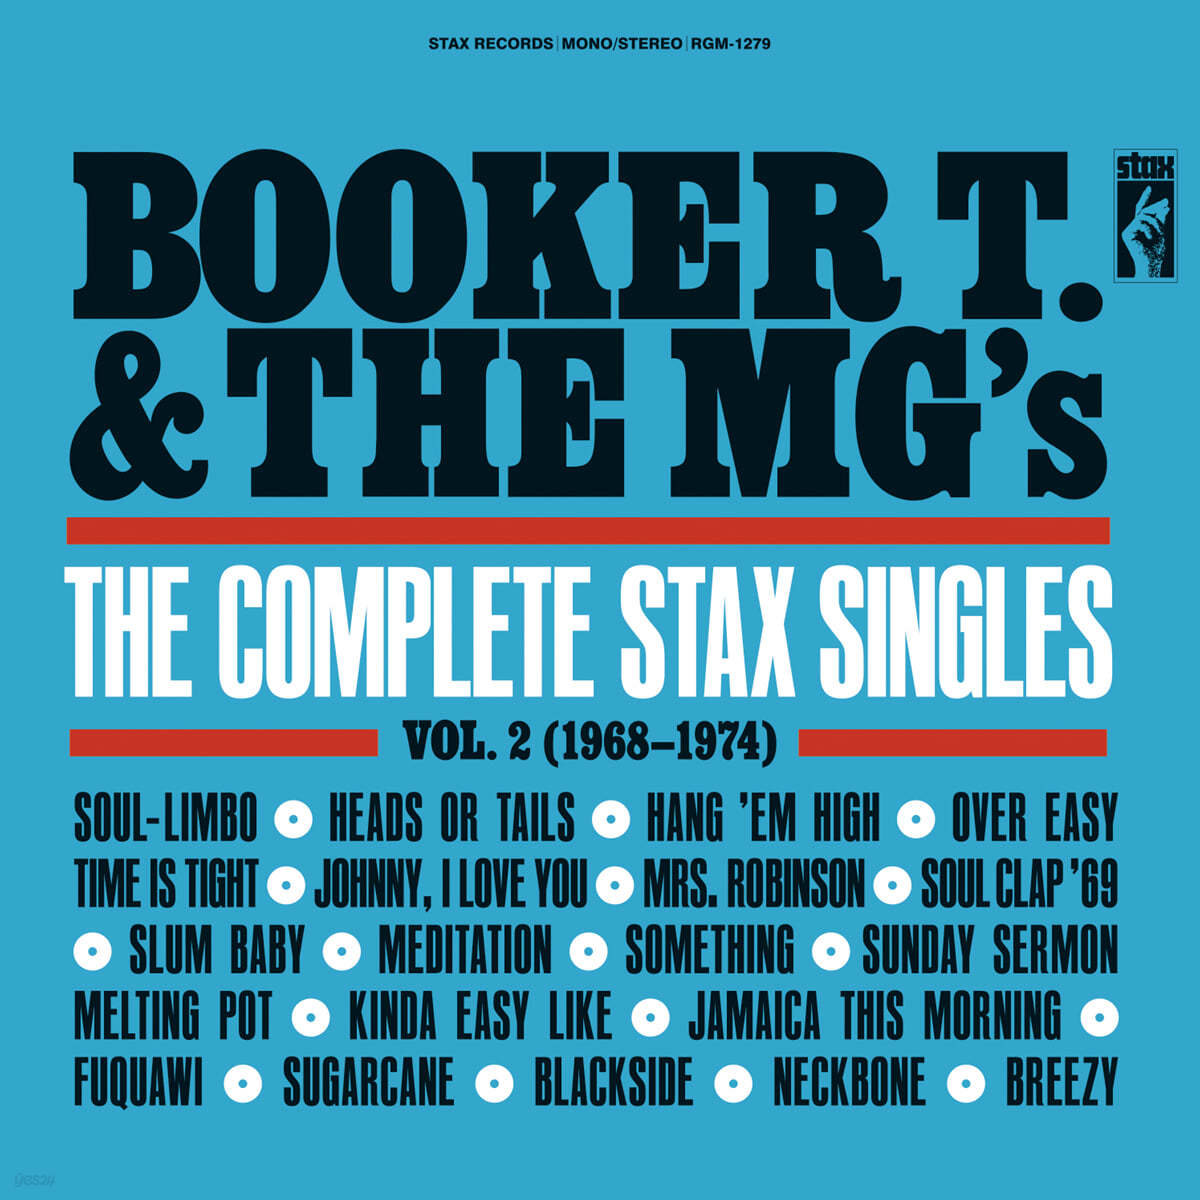 Booker T. & The MG's (부커티 앤 더 엠지스) - The Complete Stax Singles Vol. 2 (1968-1974)